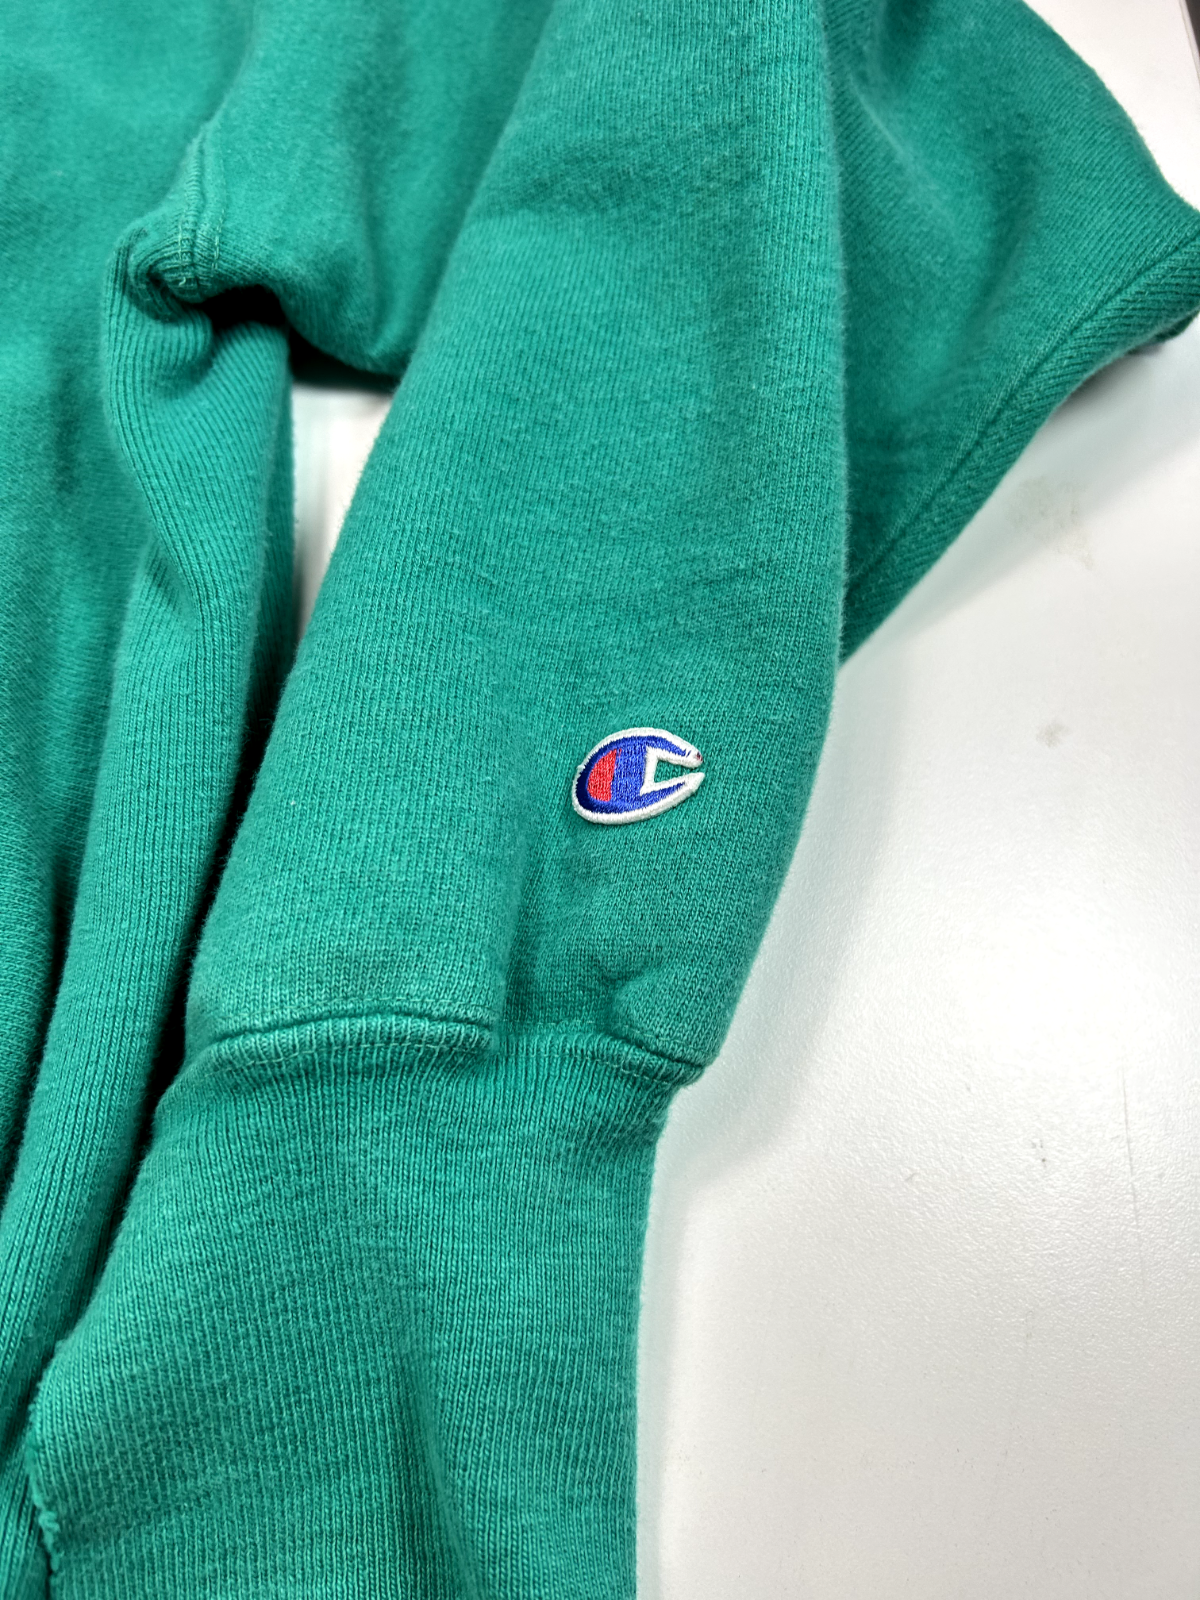 Vintage 90s Champion Reverse Weave Small C Embroidered Sweatshirt Size Large